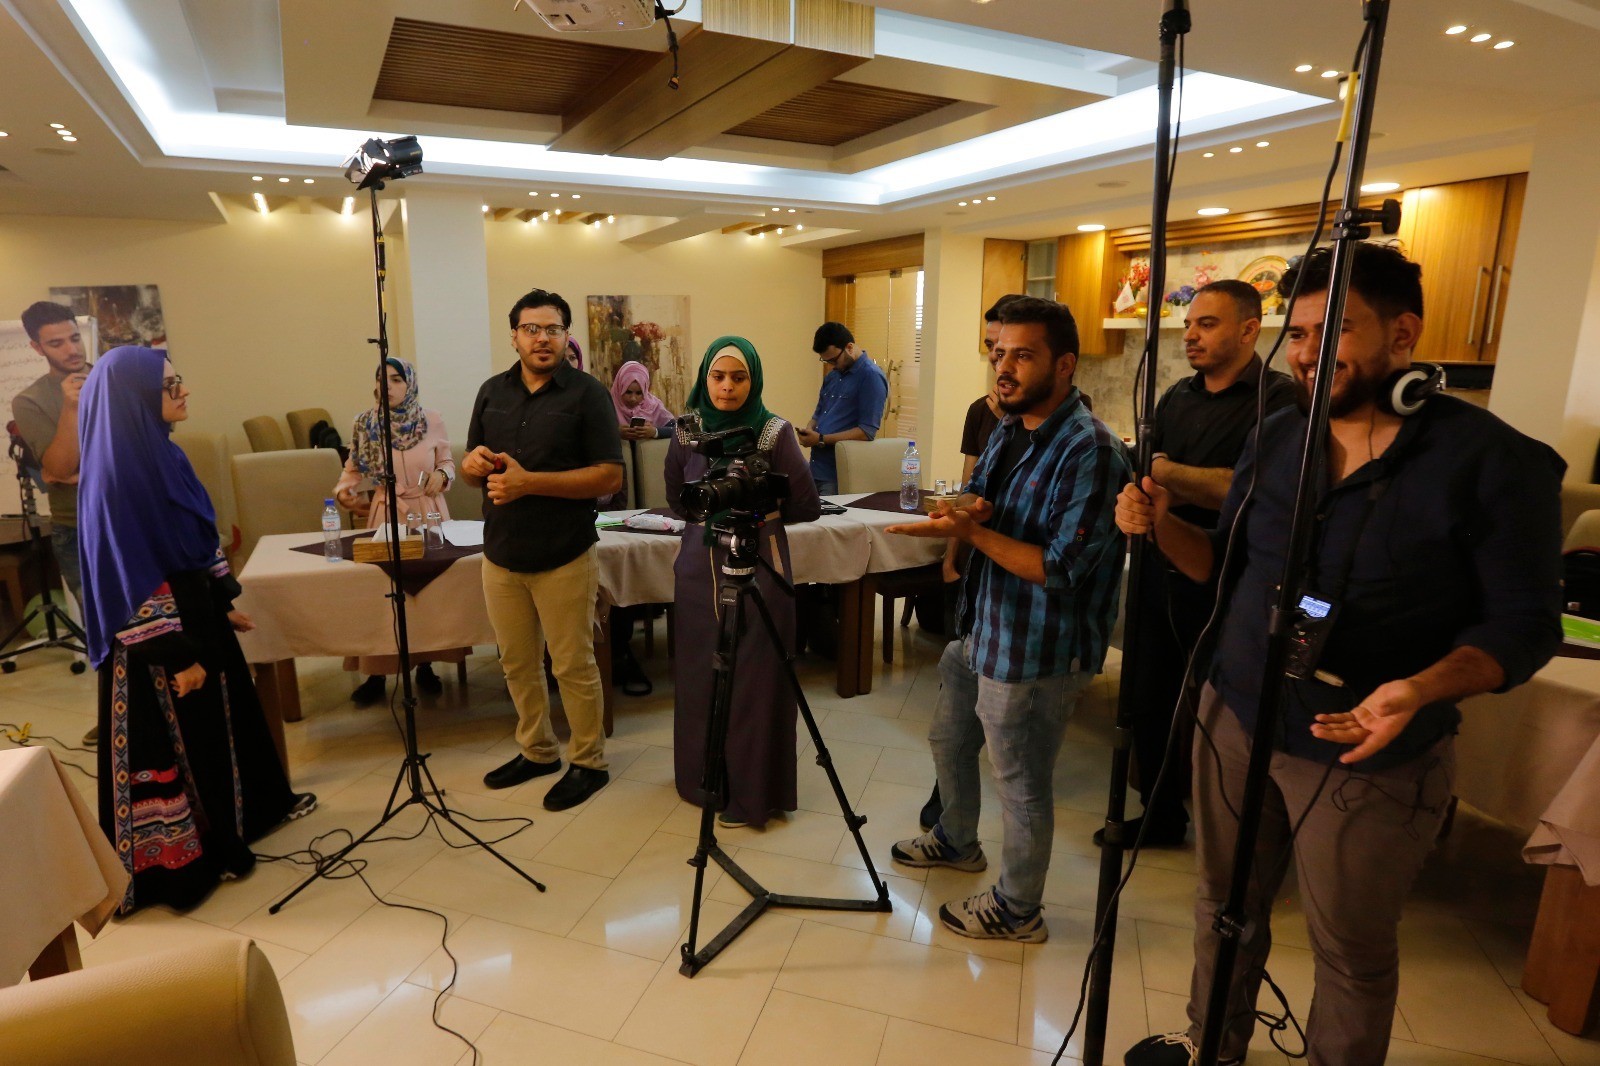 Press House holds a training course entitled "Short film directing"